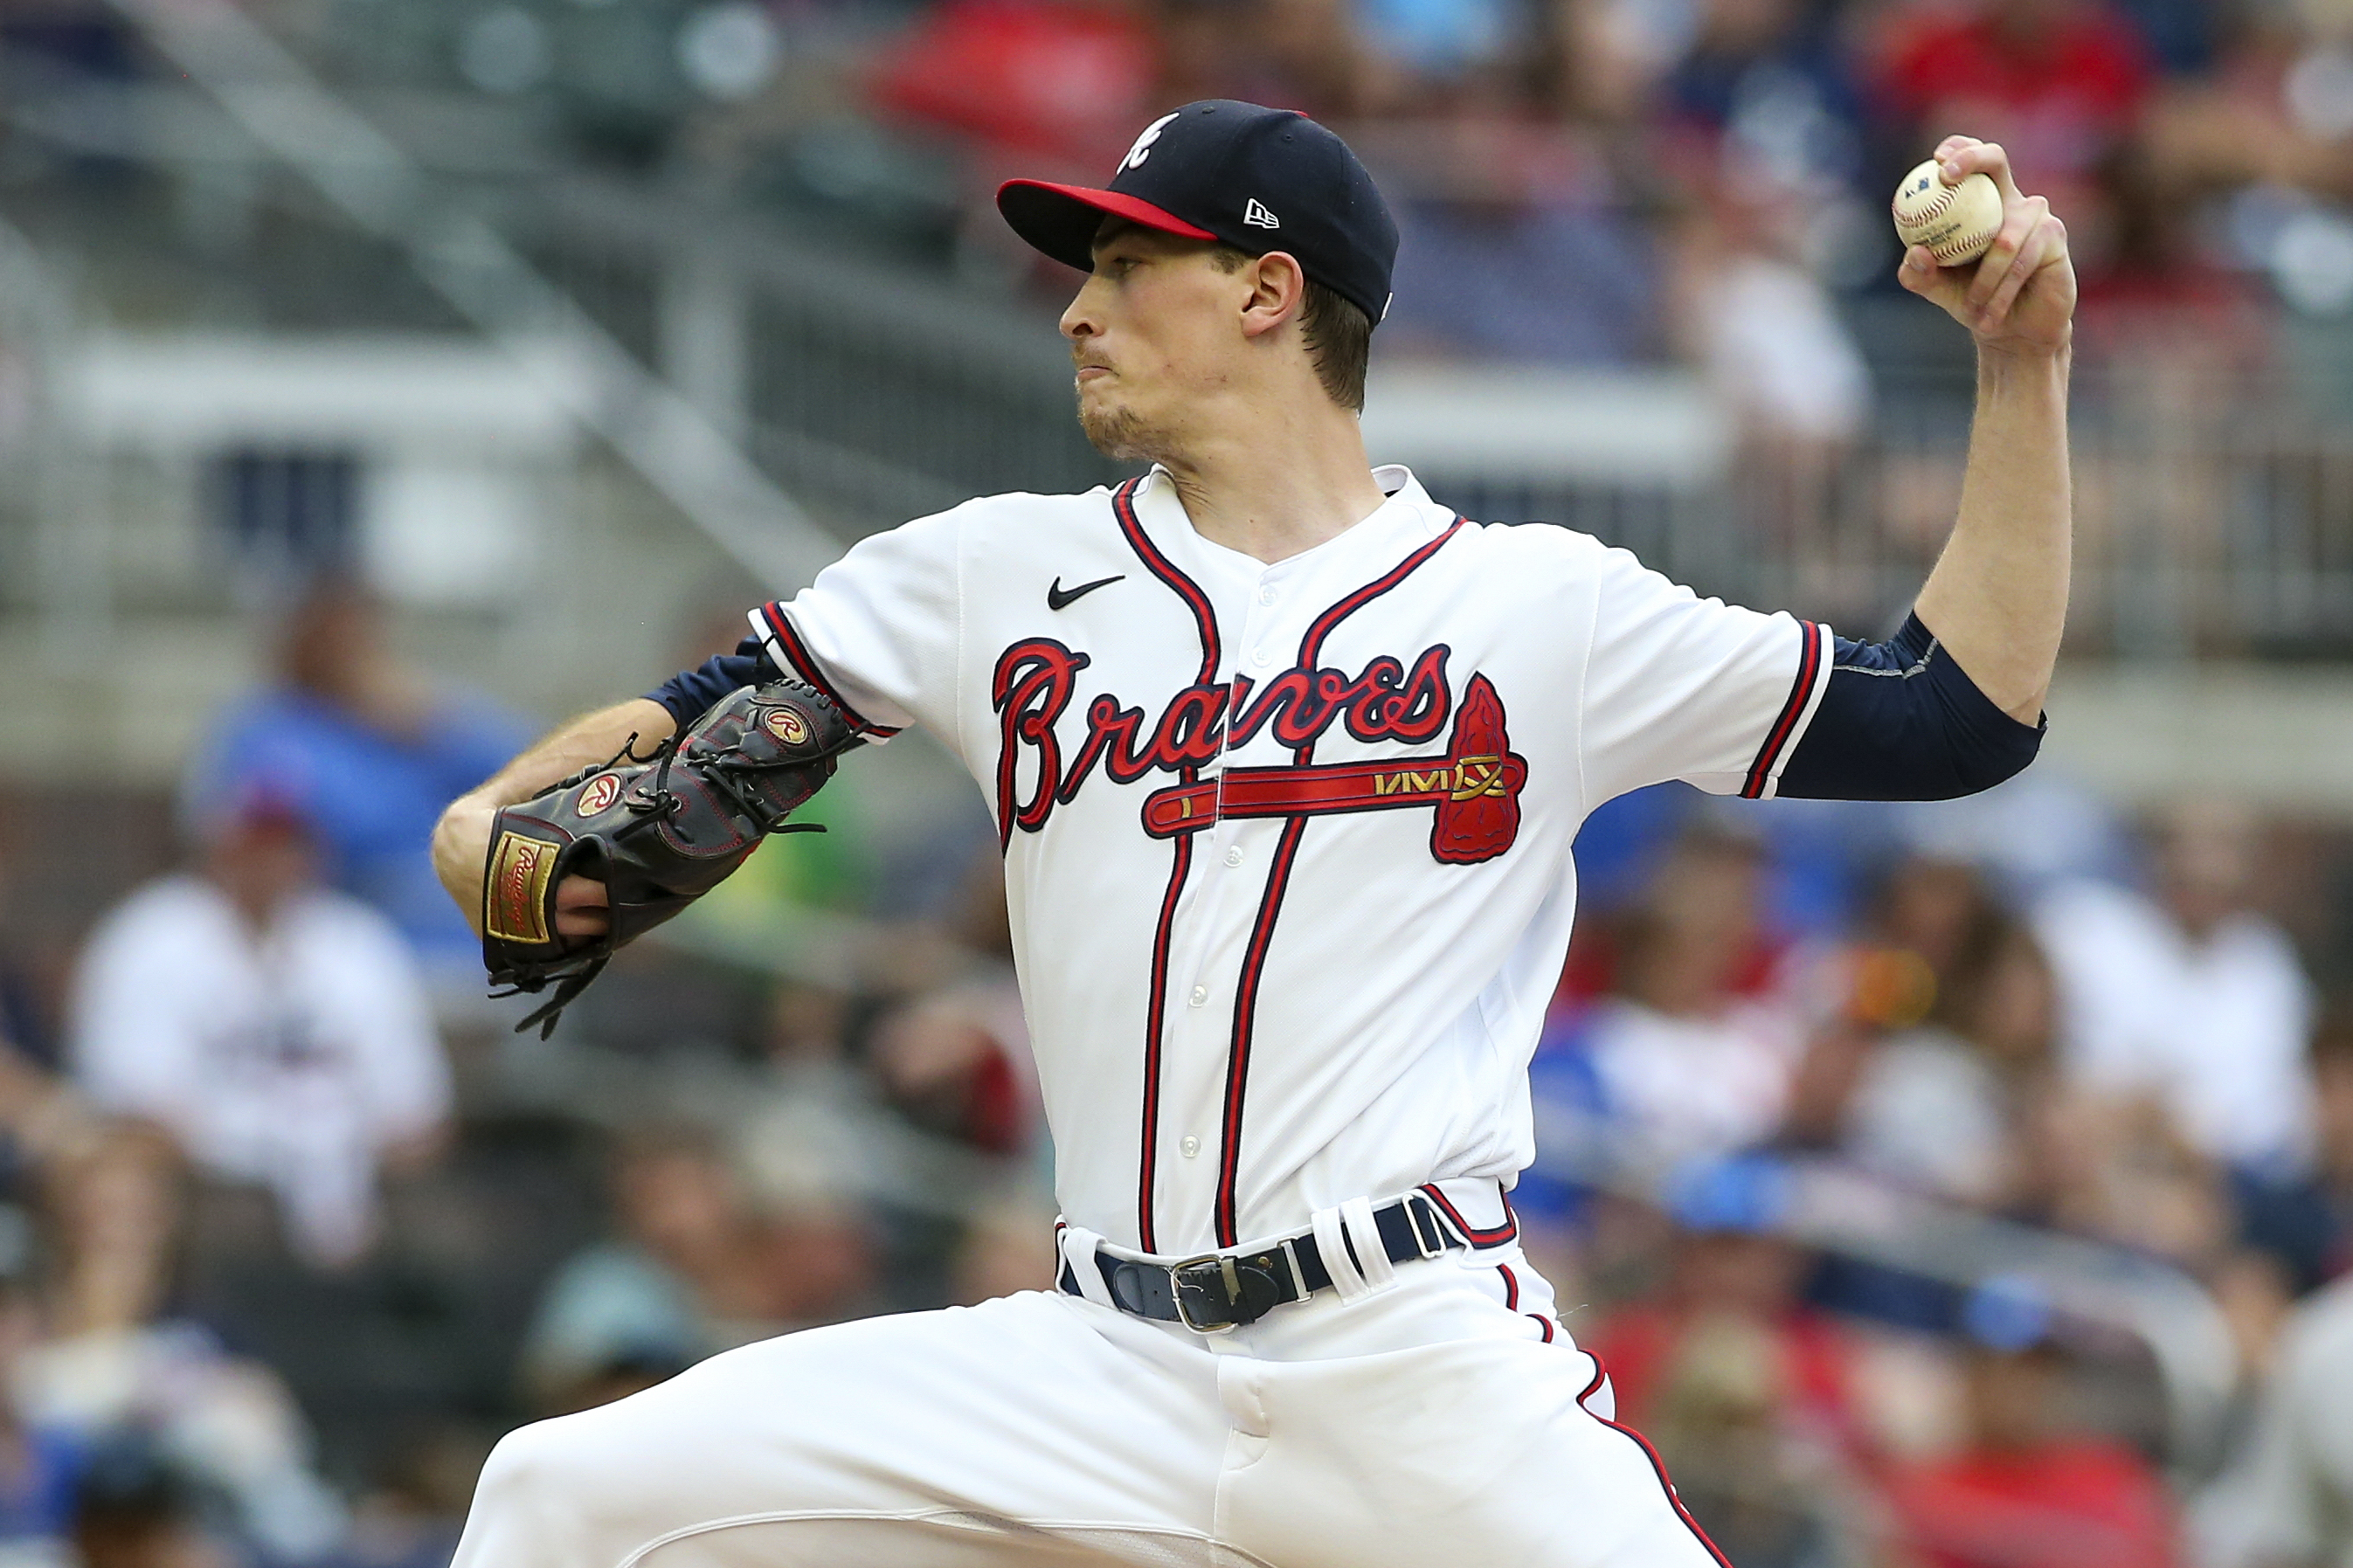 WEDNESDAY BRAVES GAME: Grissom drives in go-ahead as Atlanta